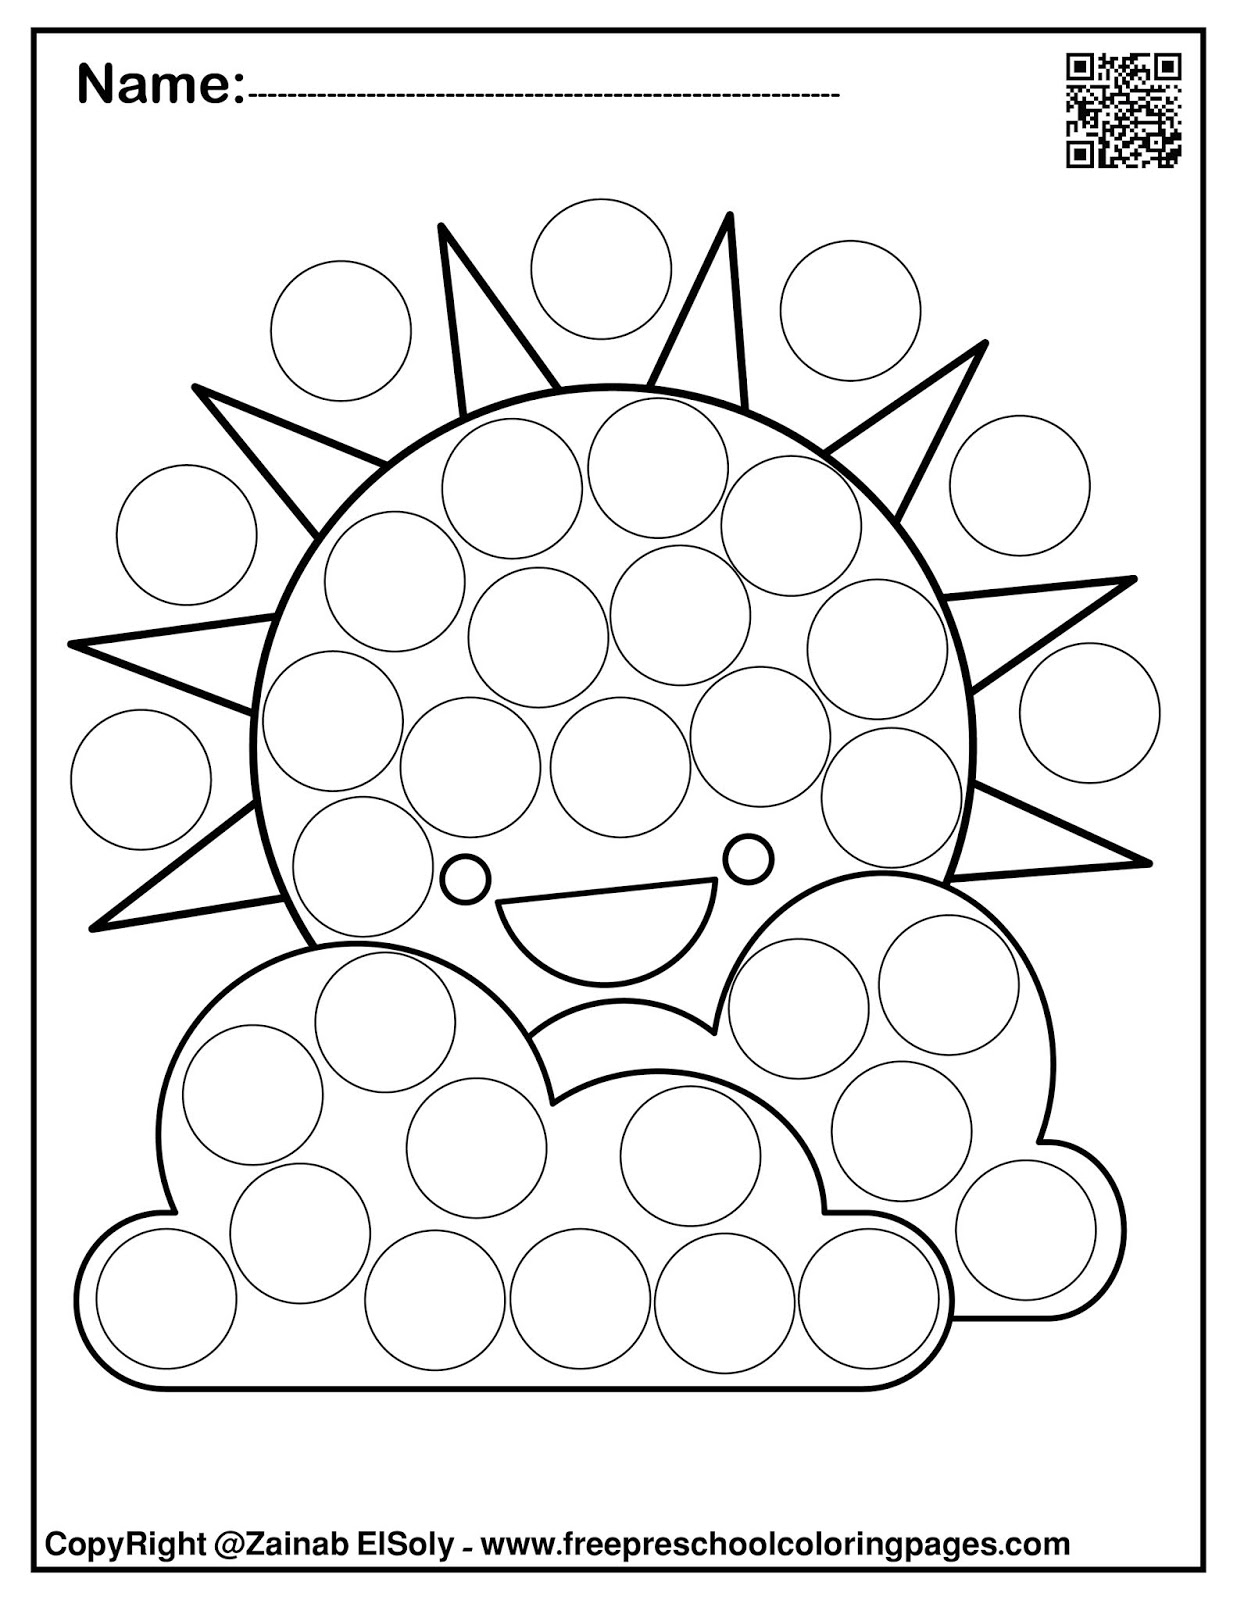 Dot Marker Coloring Pages Free Colorpaints co